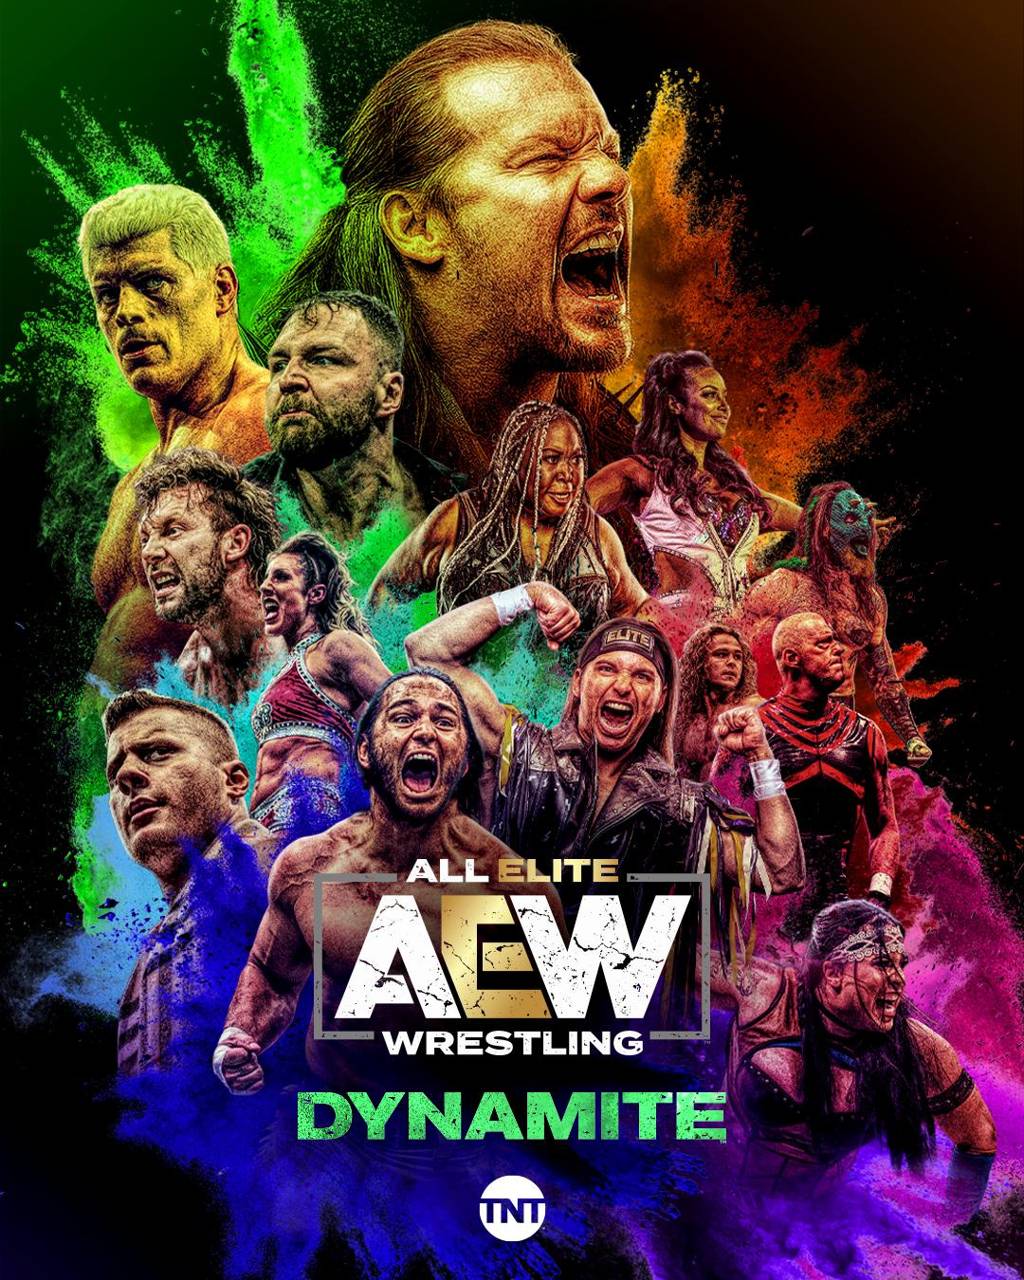 AEW on TV on Twitter Get the wallpaper for your phone   httpstcoQYYn9XO9qa  Twitter